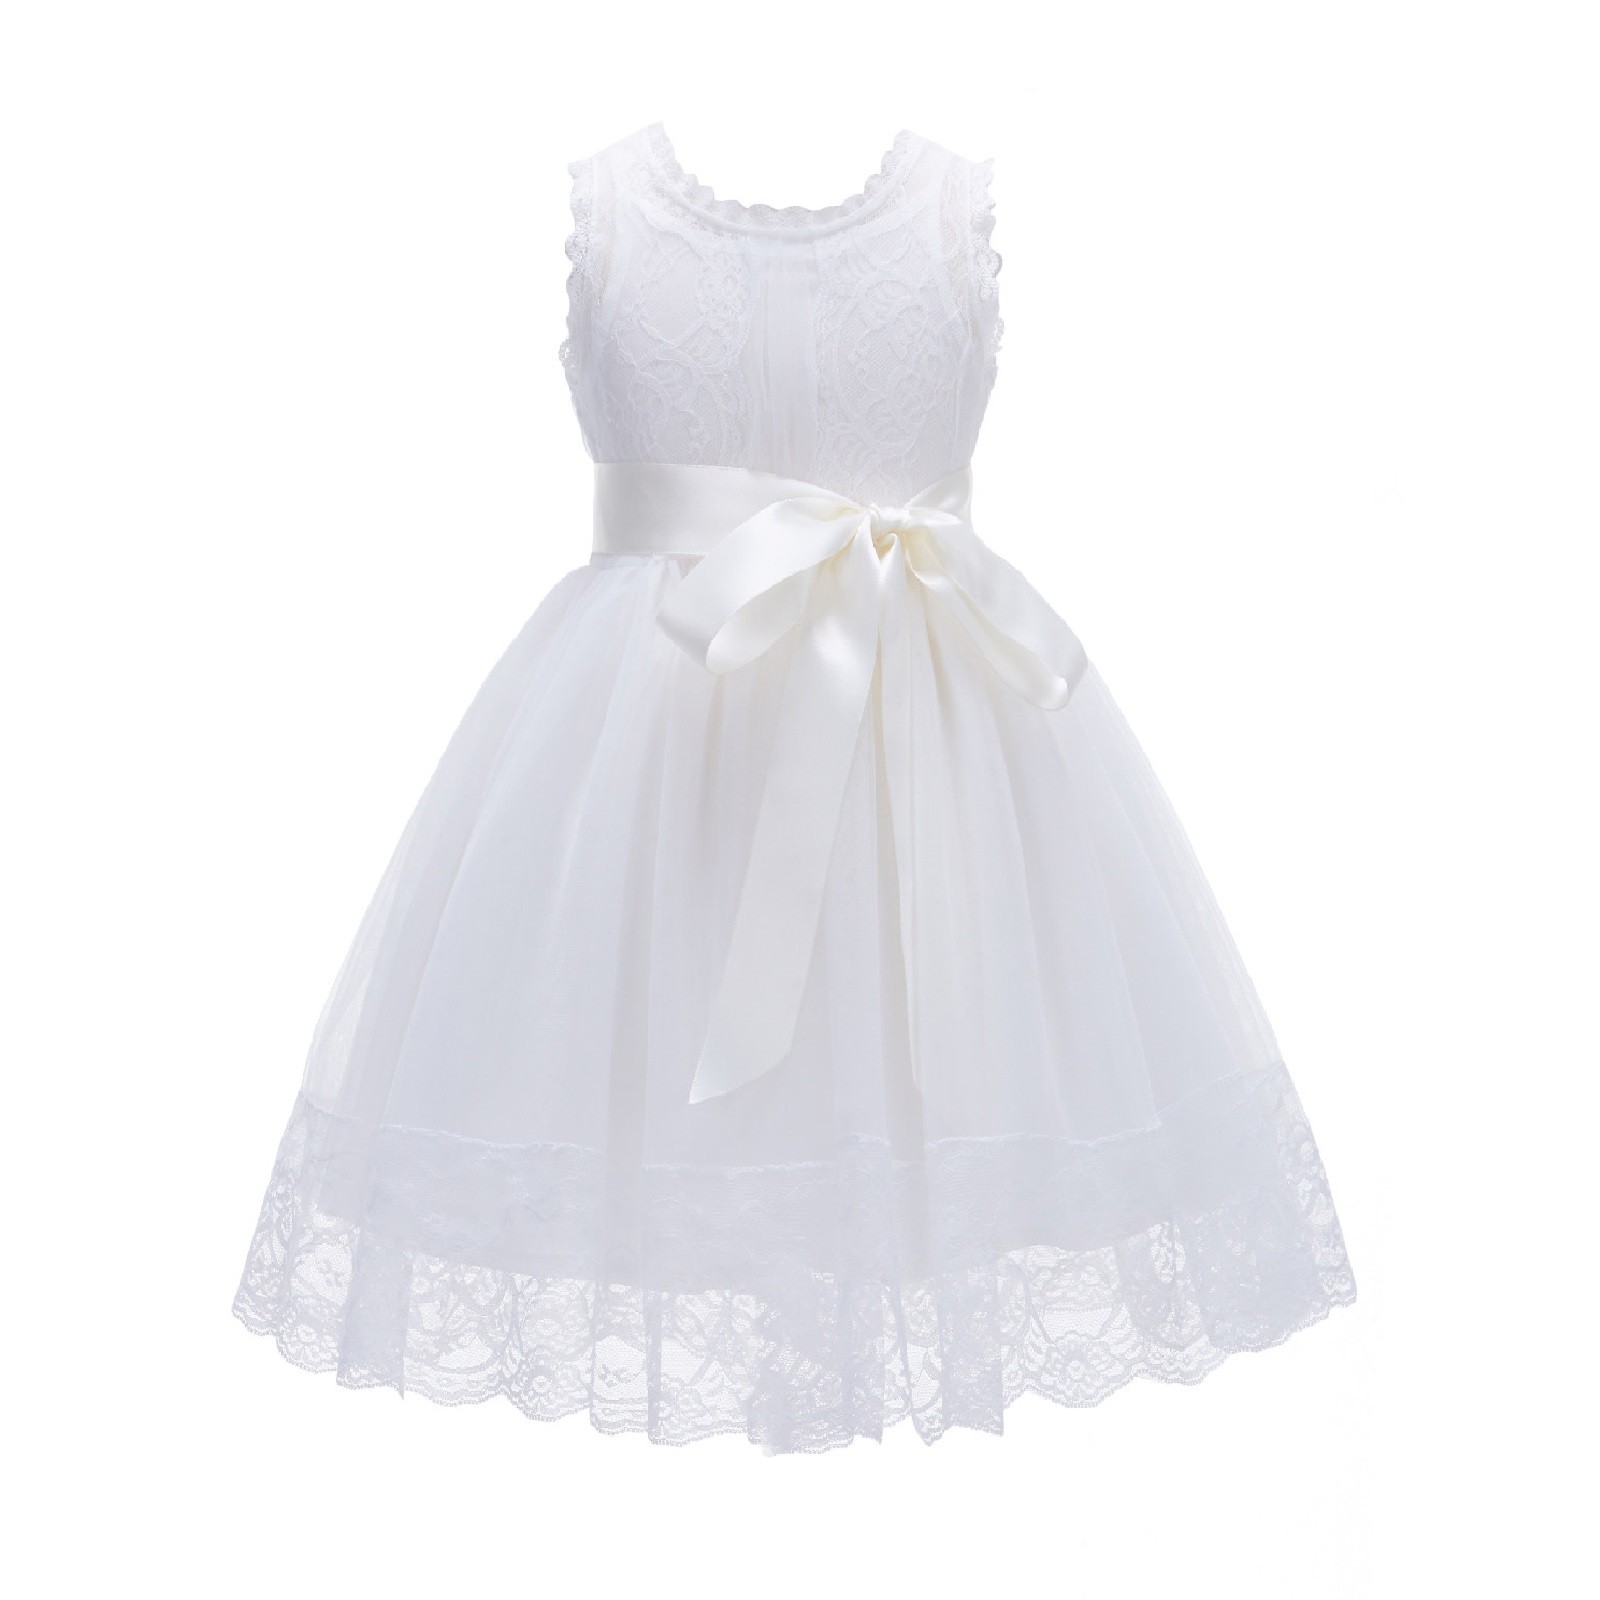 Ivory Cotton Floral Lace Overlay Flower Girl Dress 169R